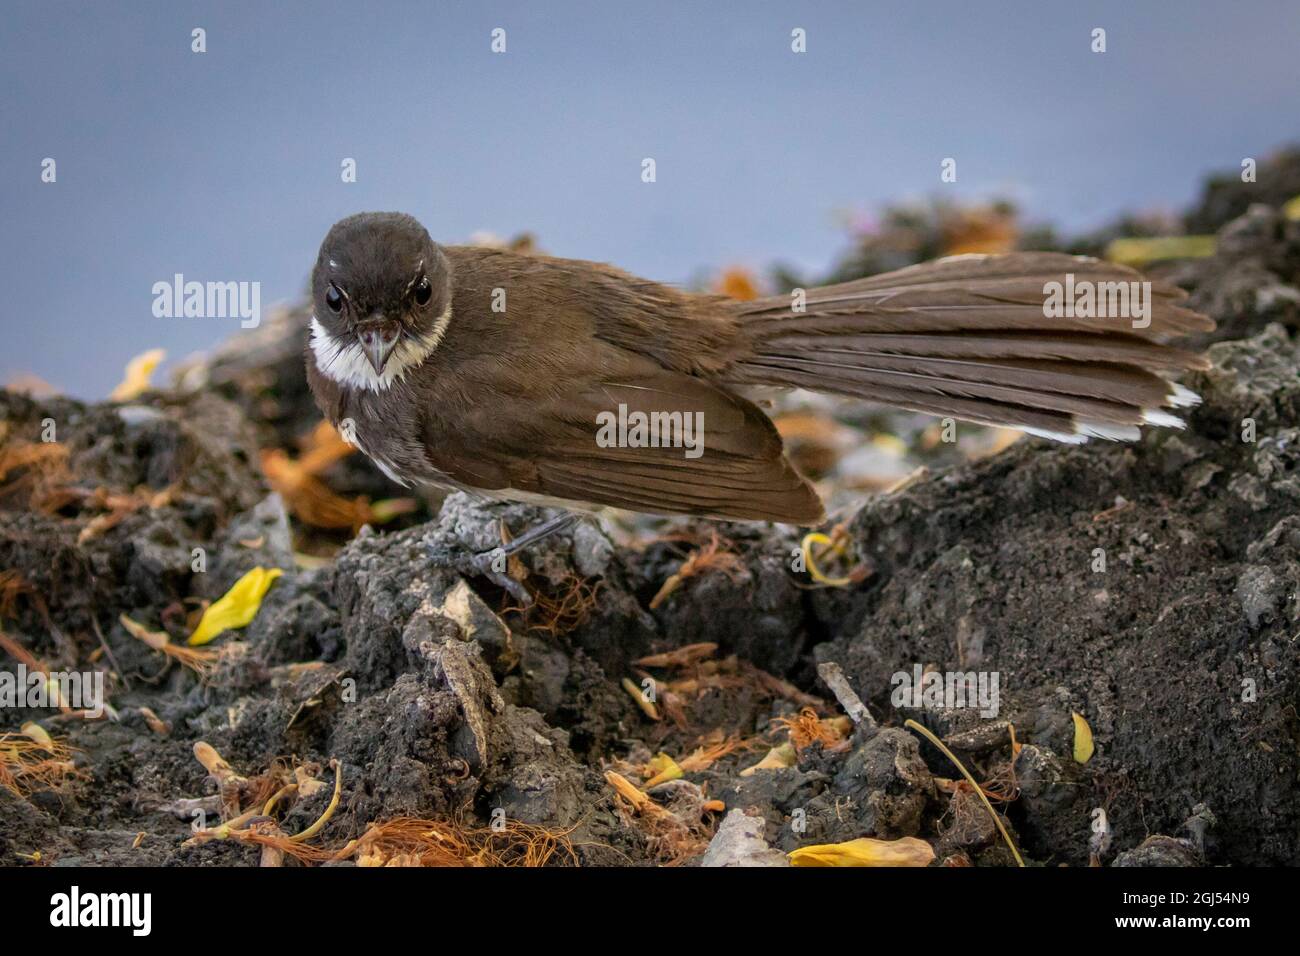 Sunda Pied Fantail or Malaysian Pied Fantail standing on the ground. Stock Photo